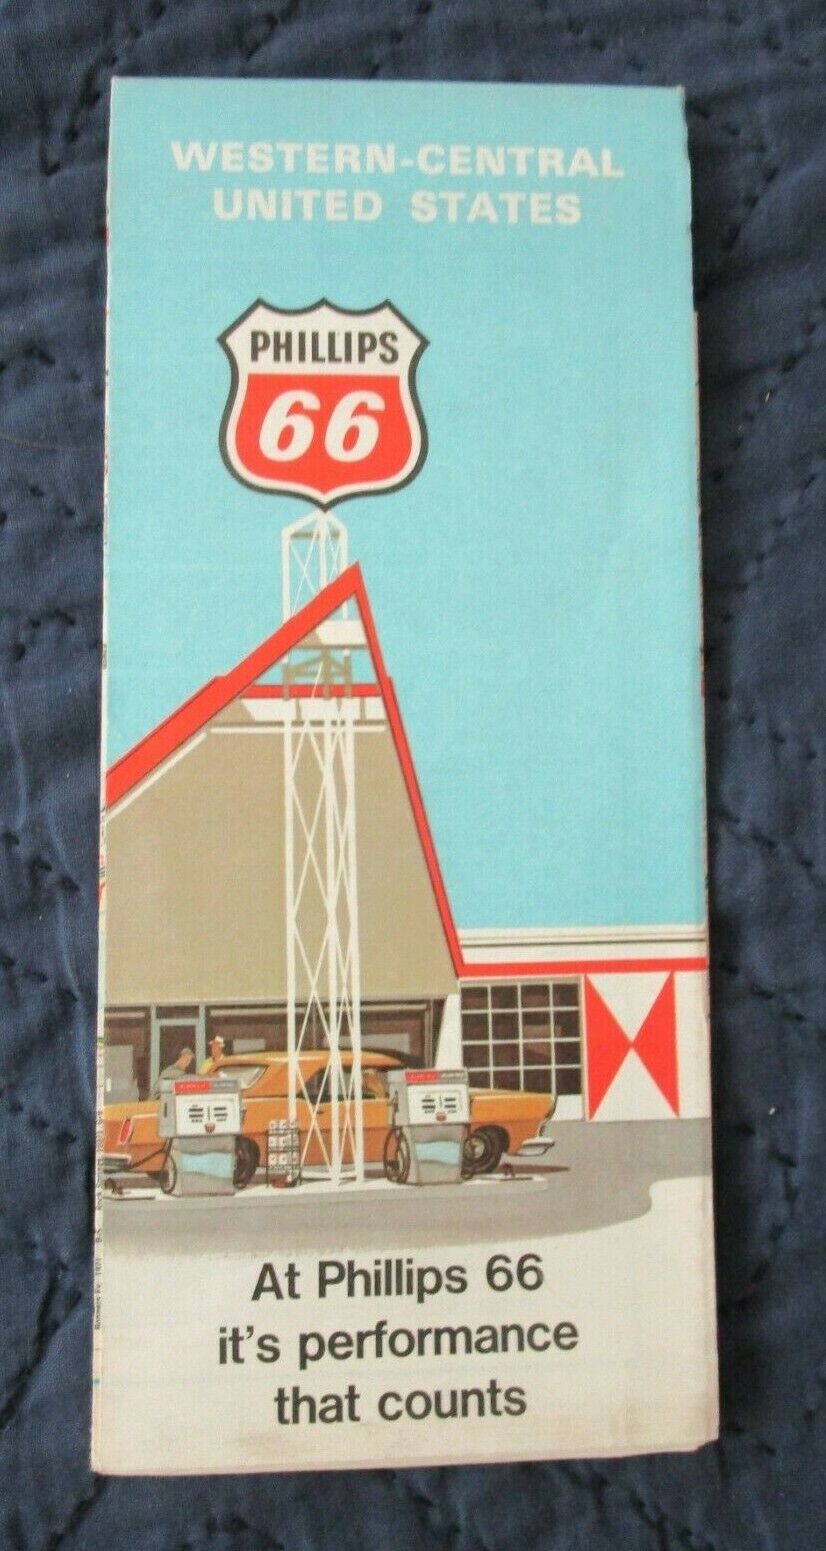 1971  PHILLIPS 66   WESTERN - CENTRAL UNITED STATES  MAP